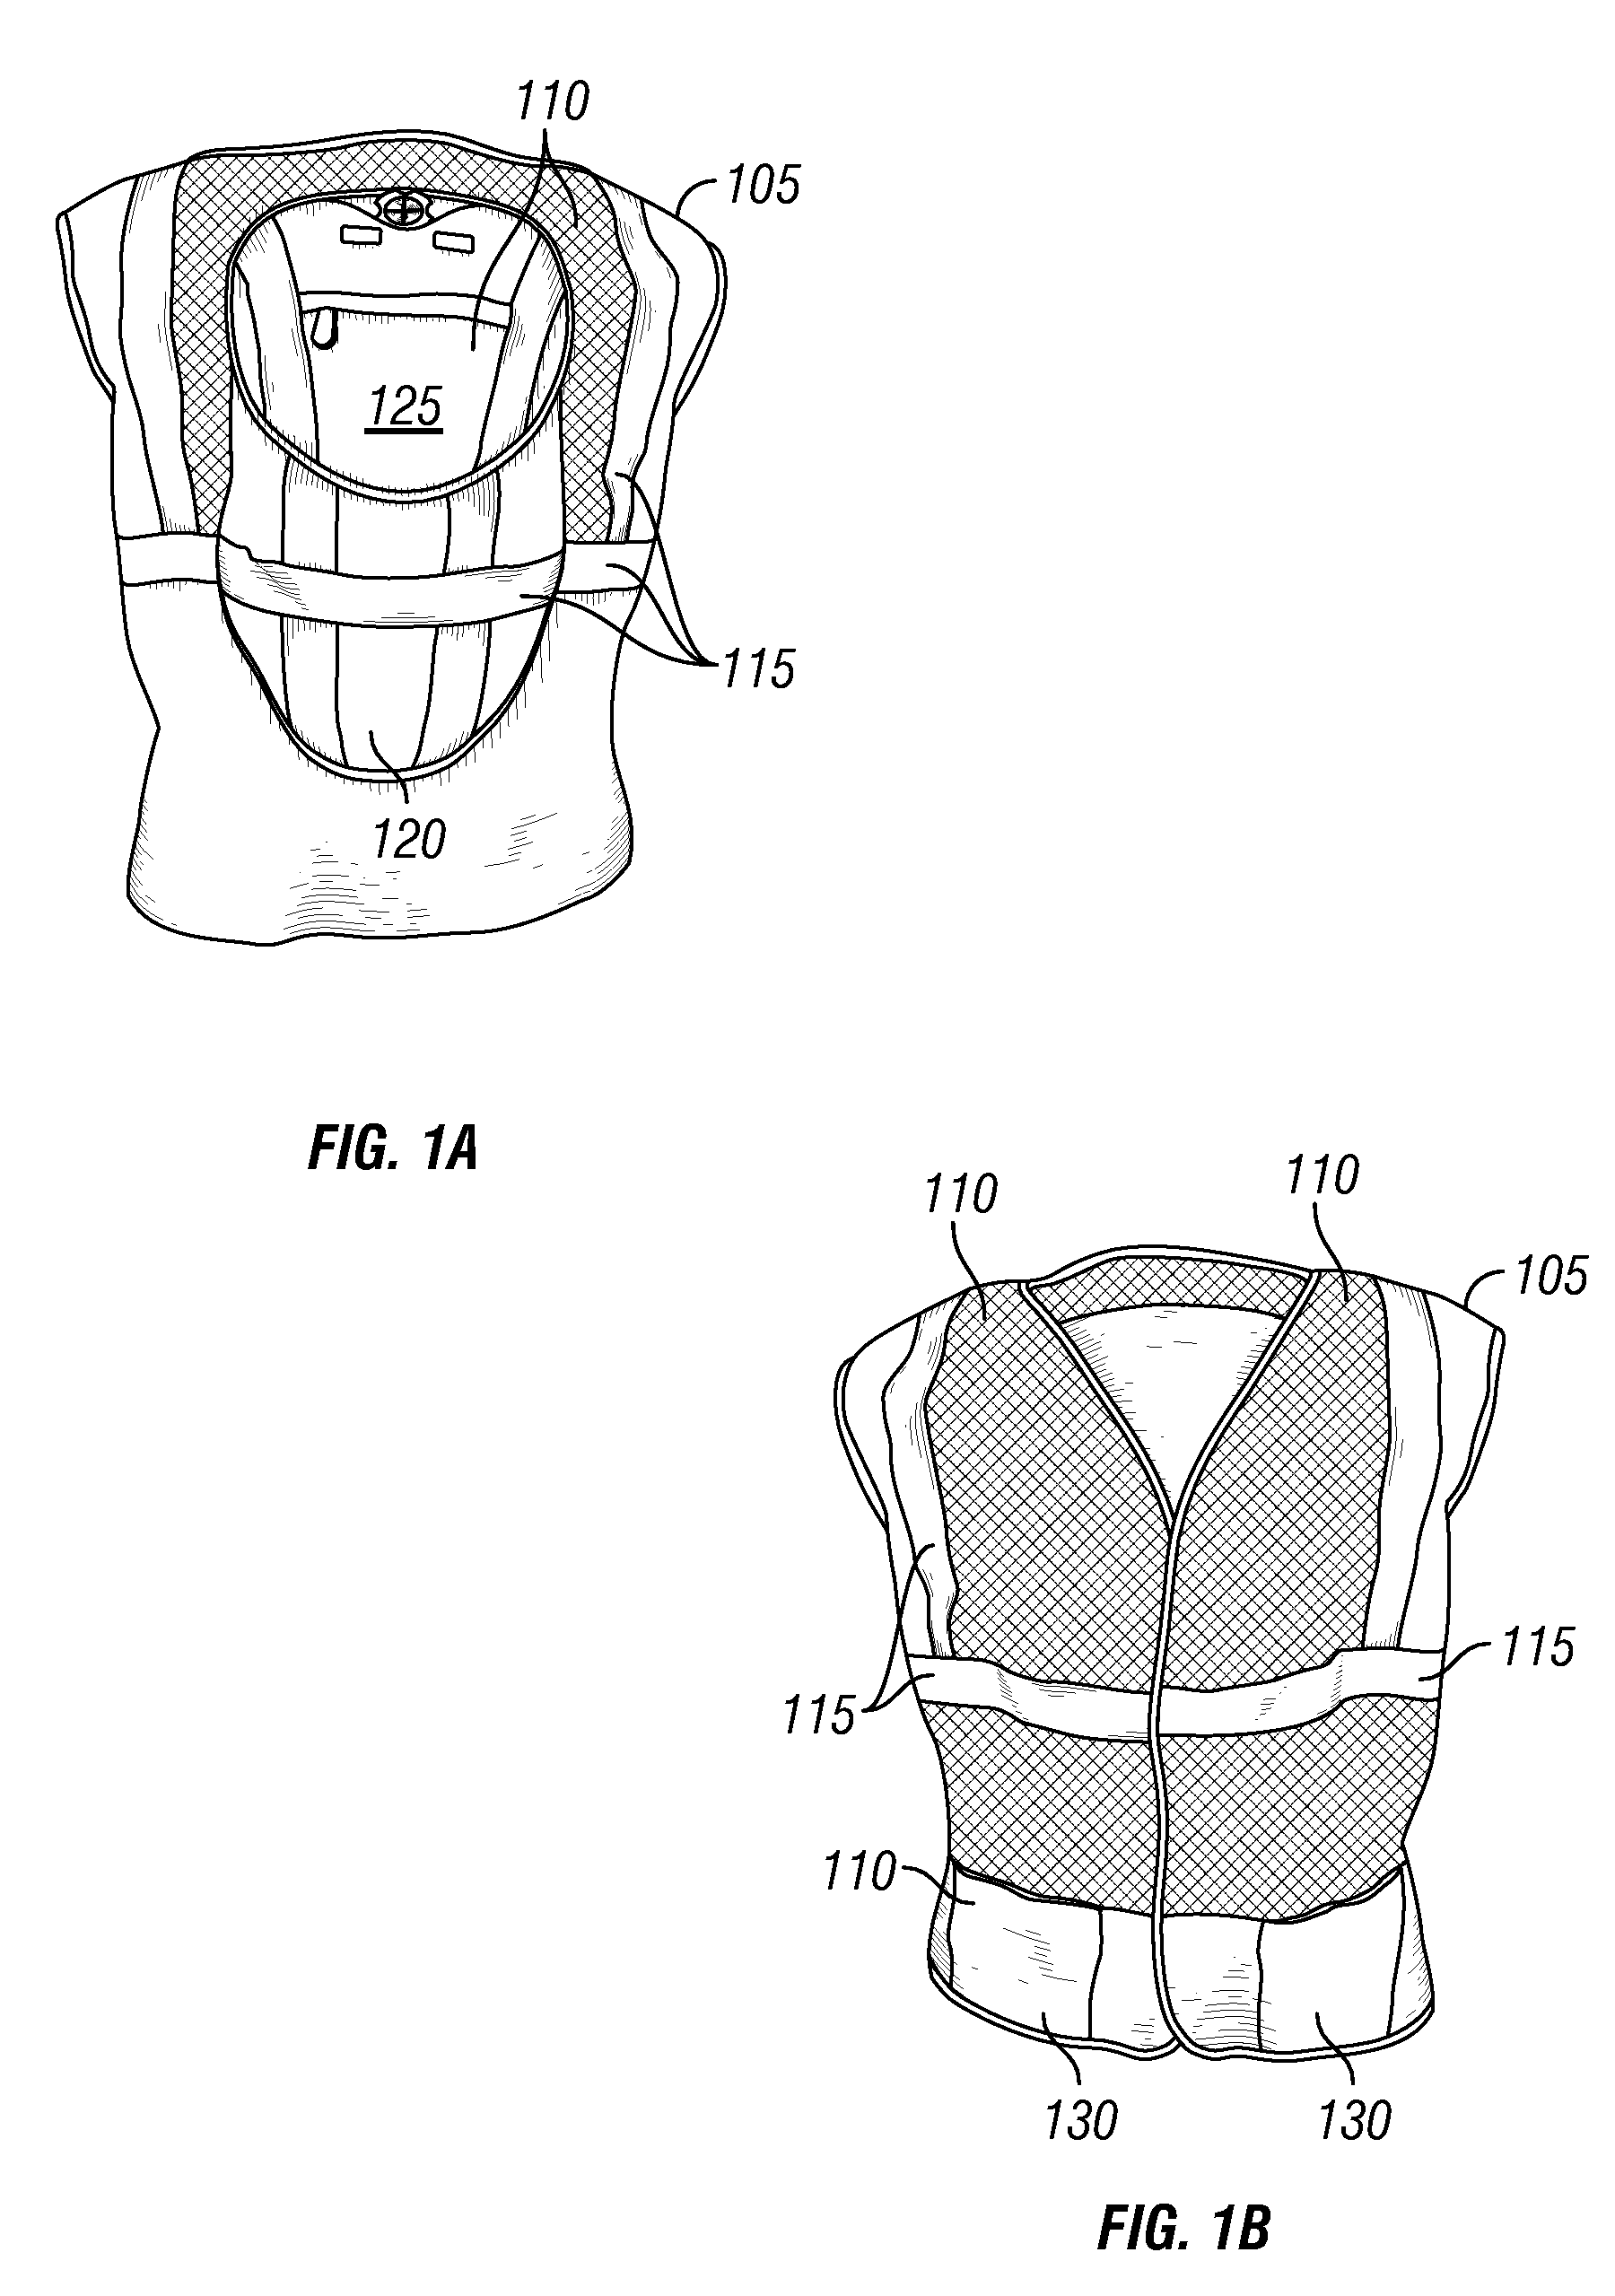 High Visibility Safety Vest With Integrated Hydration Bladder System